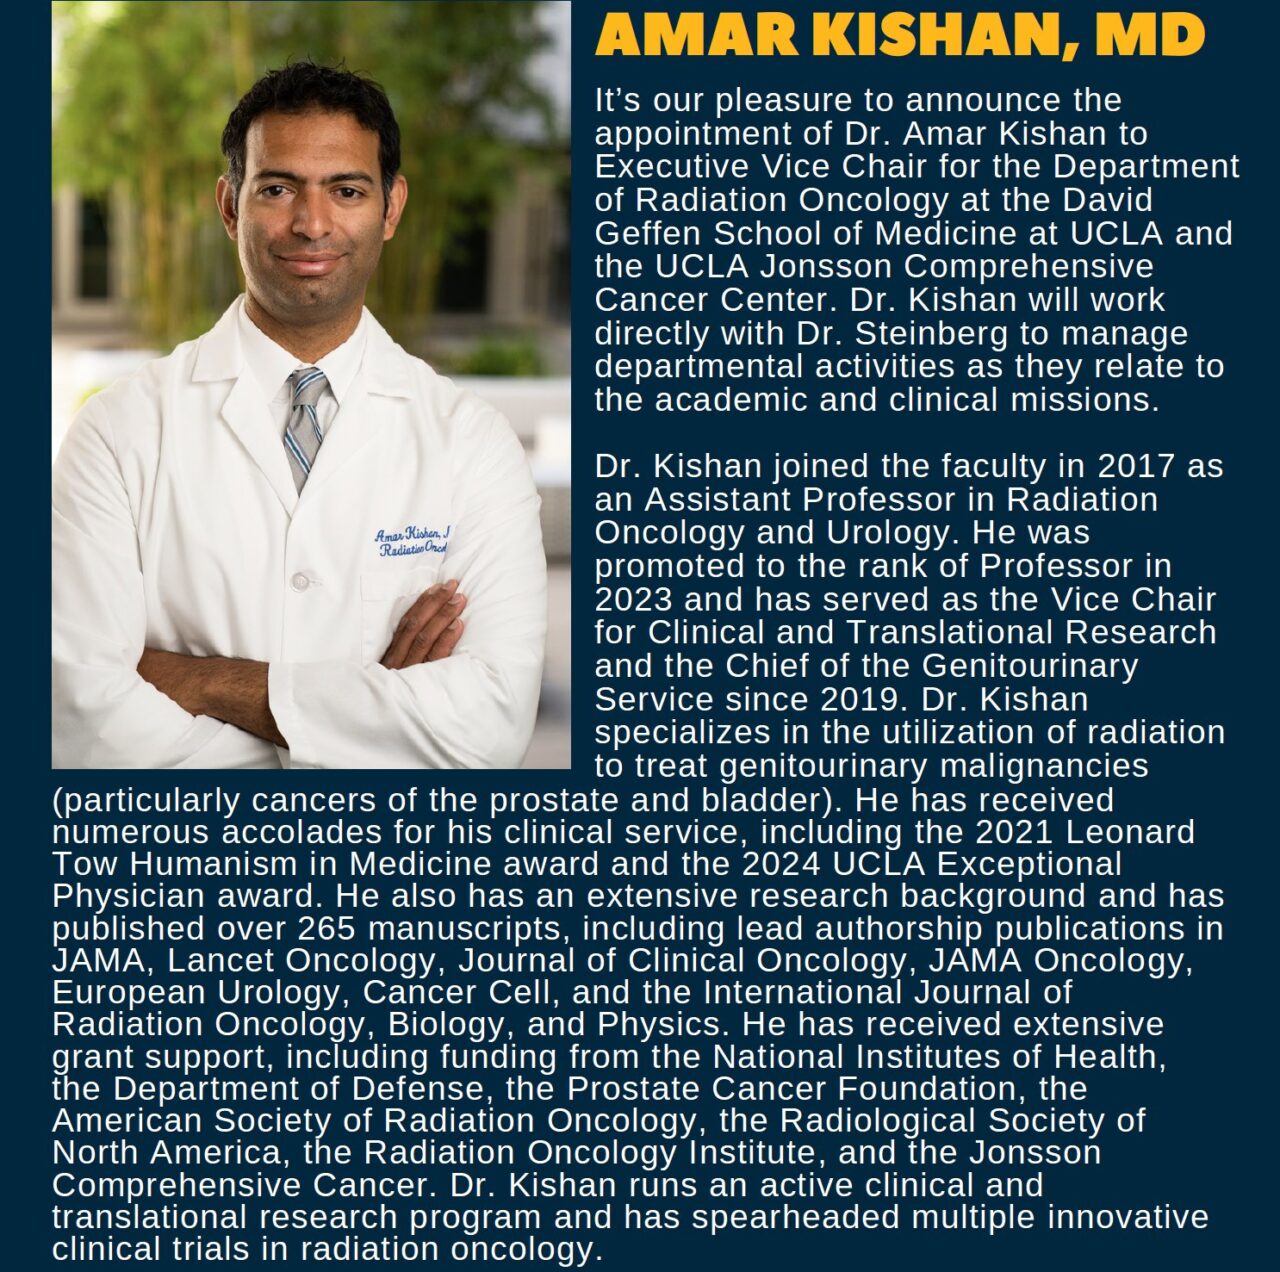 Michael Steinberg: Dr. Amar Kishan as Executive Vice Chair for the Department of Radiation Oncology at UCLA